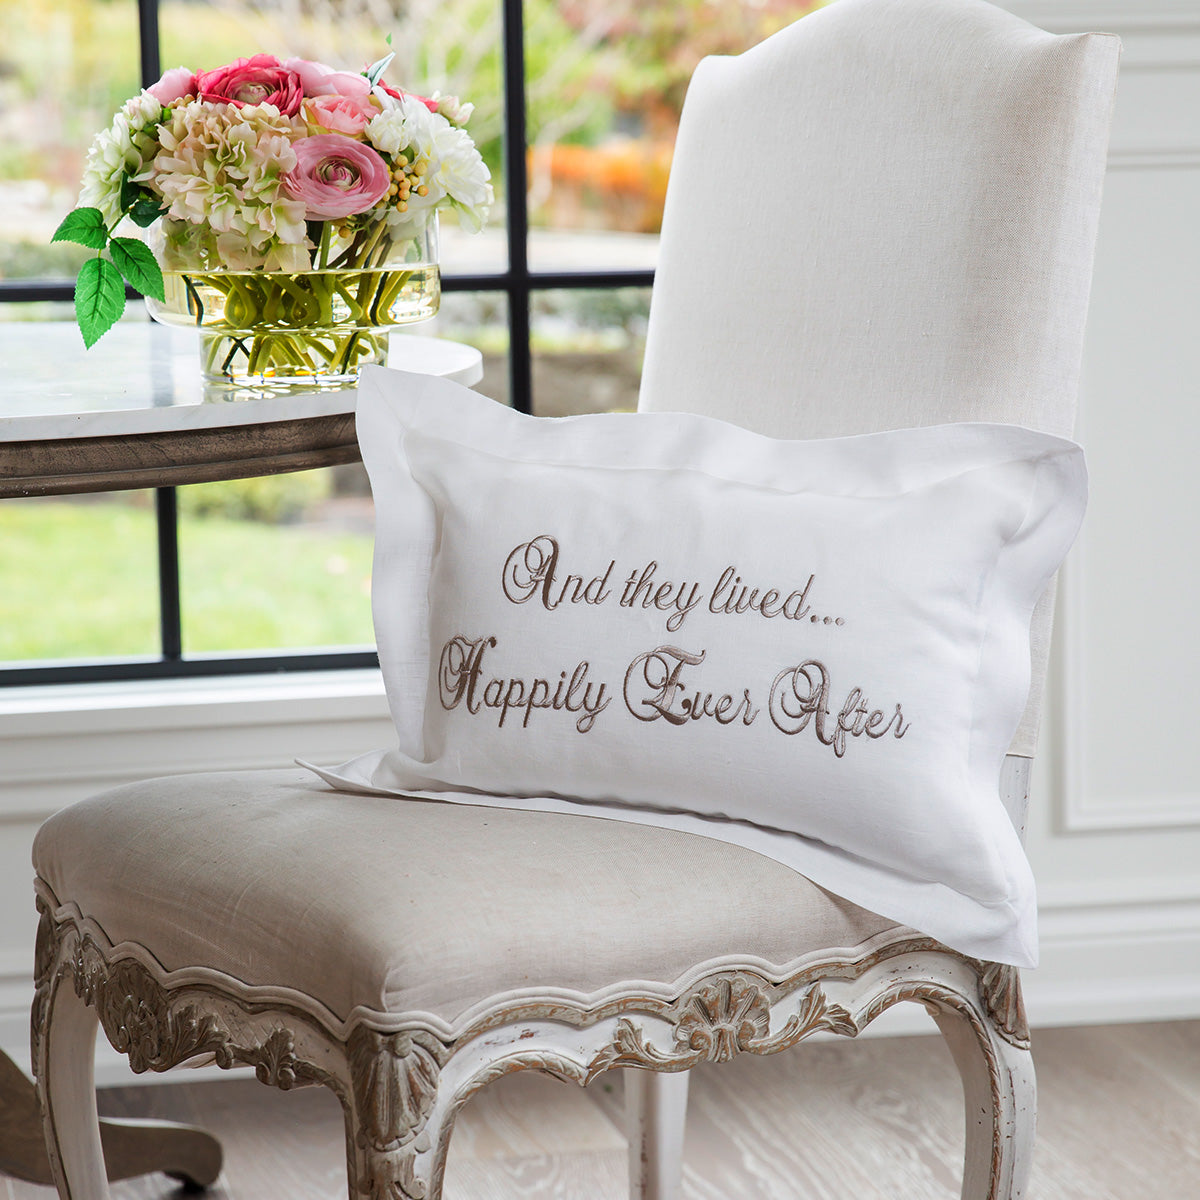 They Lived Happily Ever After Linen Decor Pillow